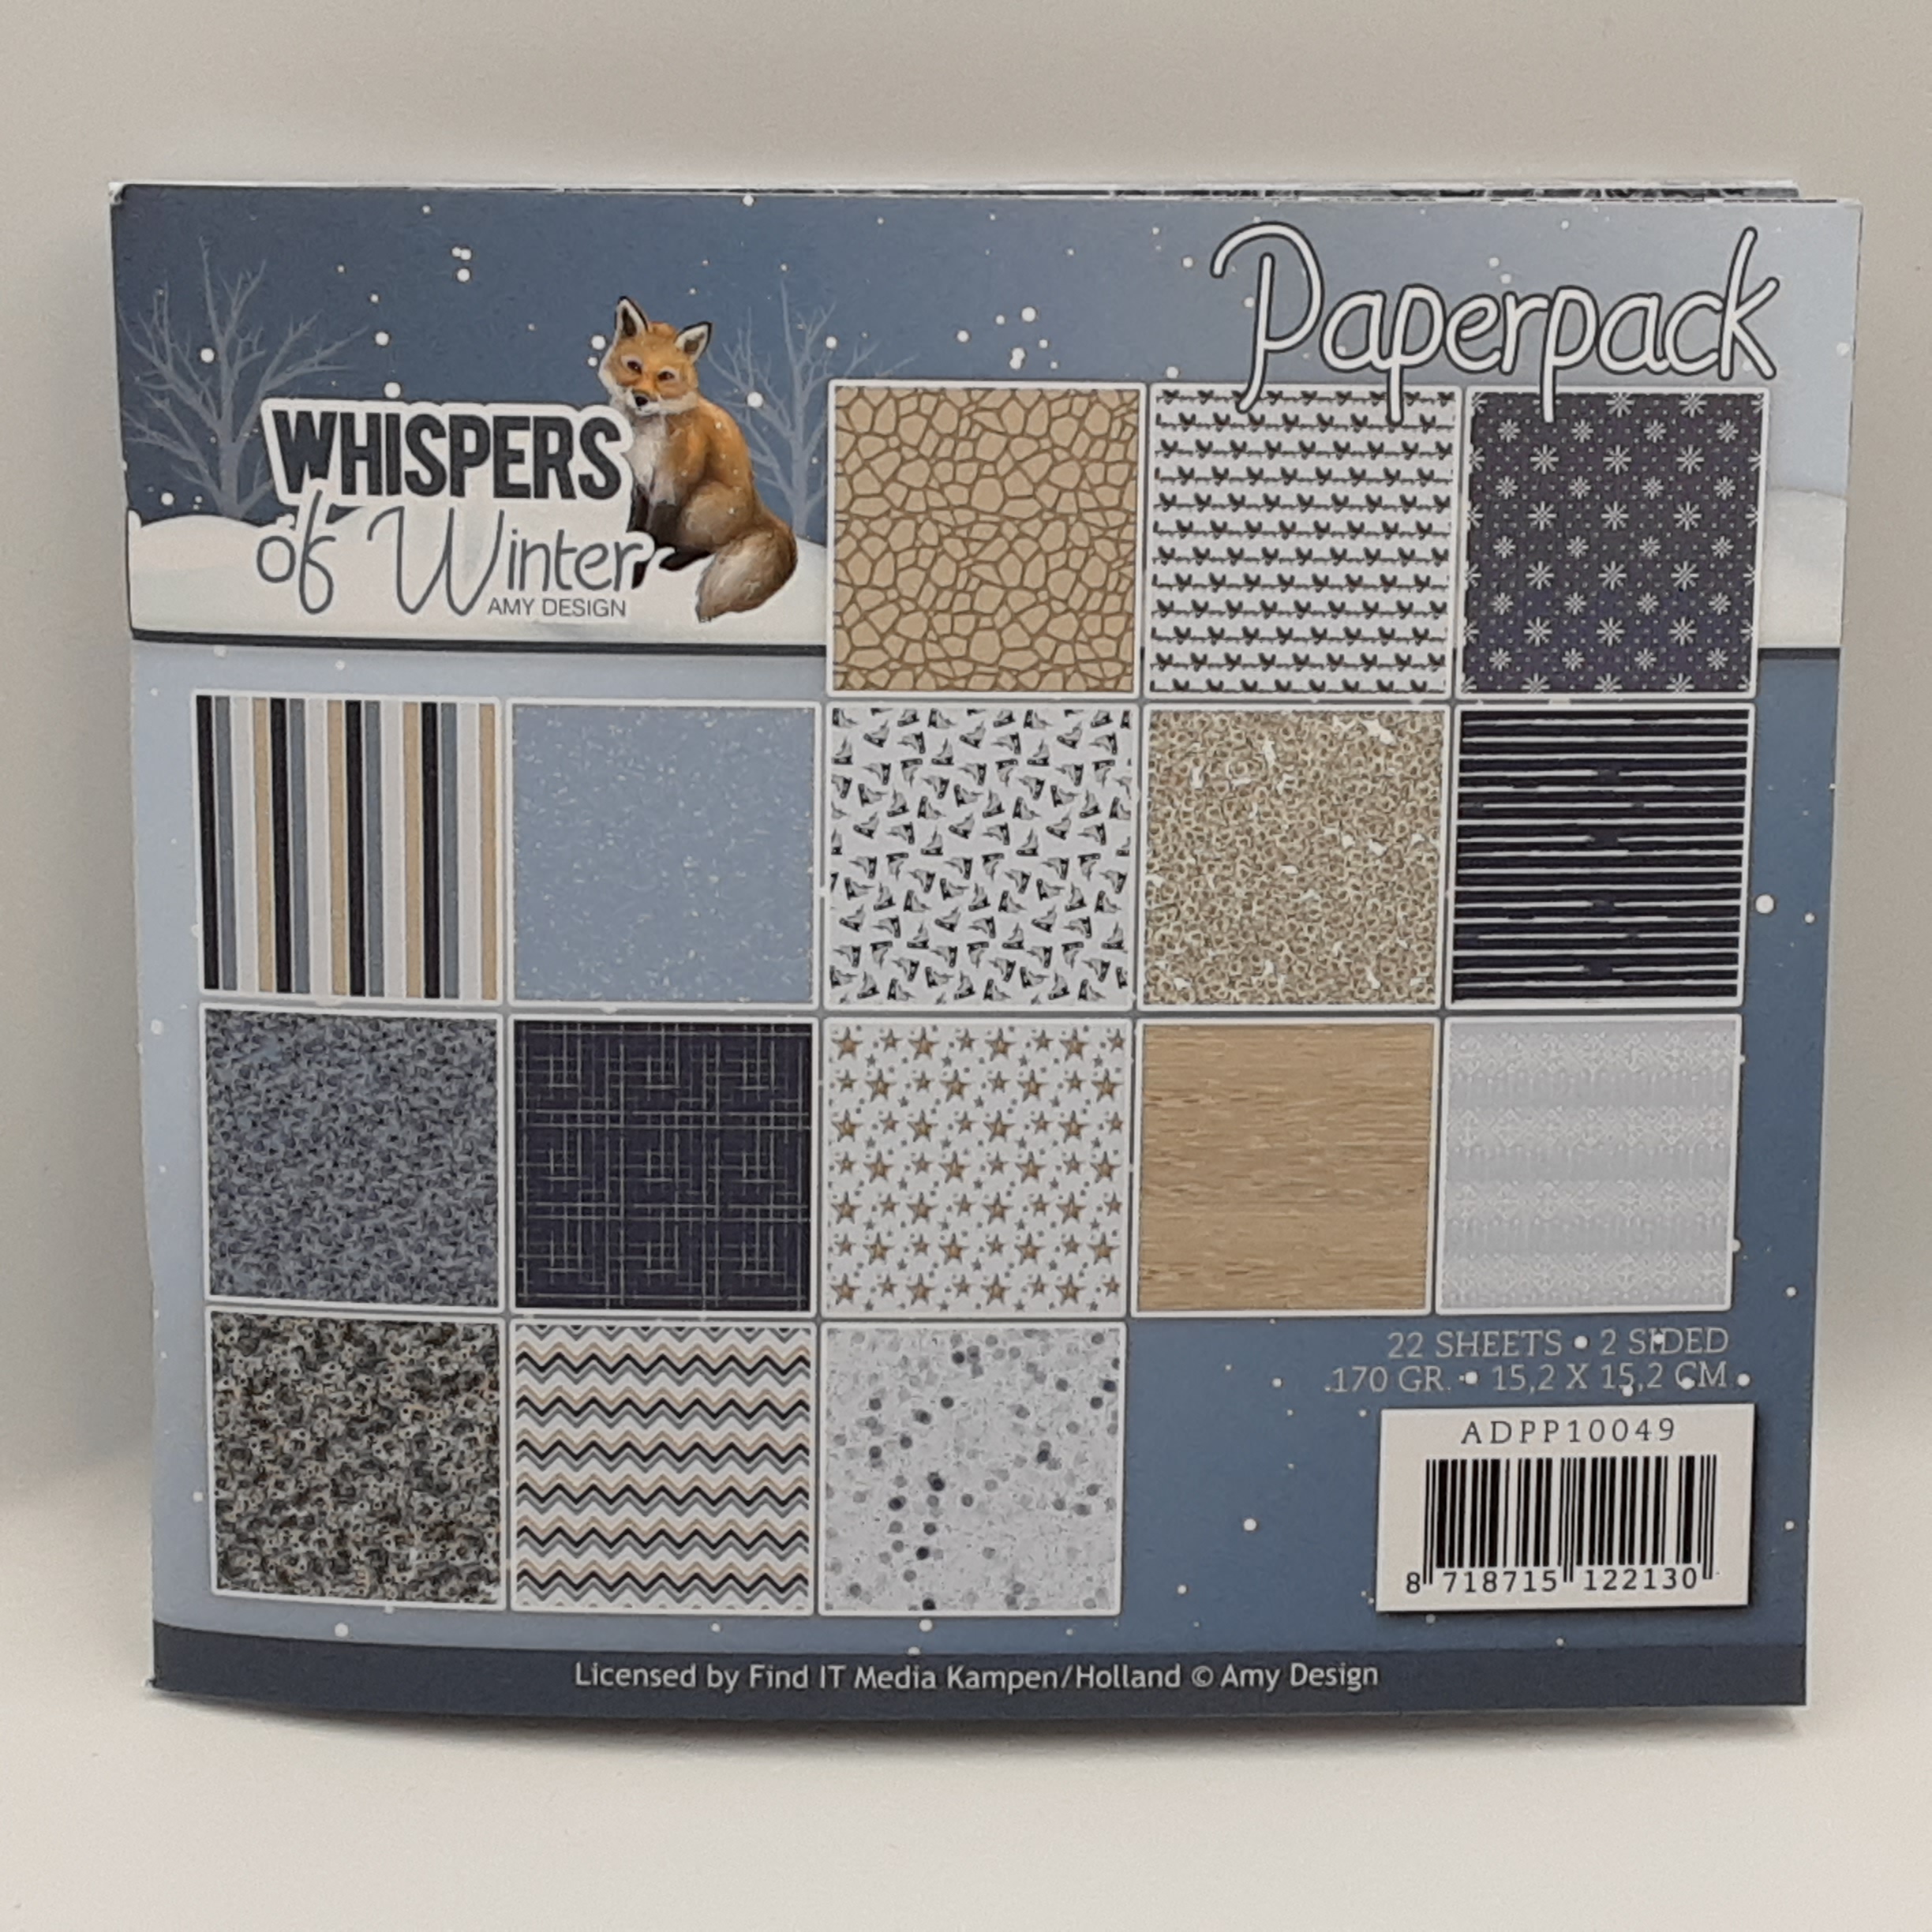 paperpack whispers of winter